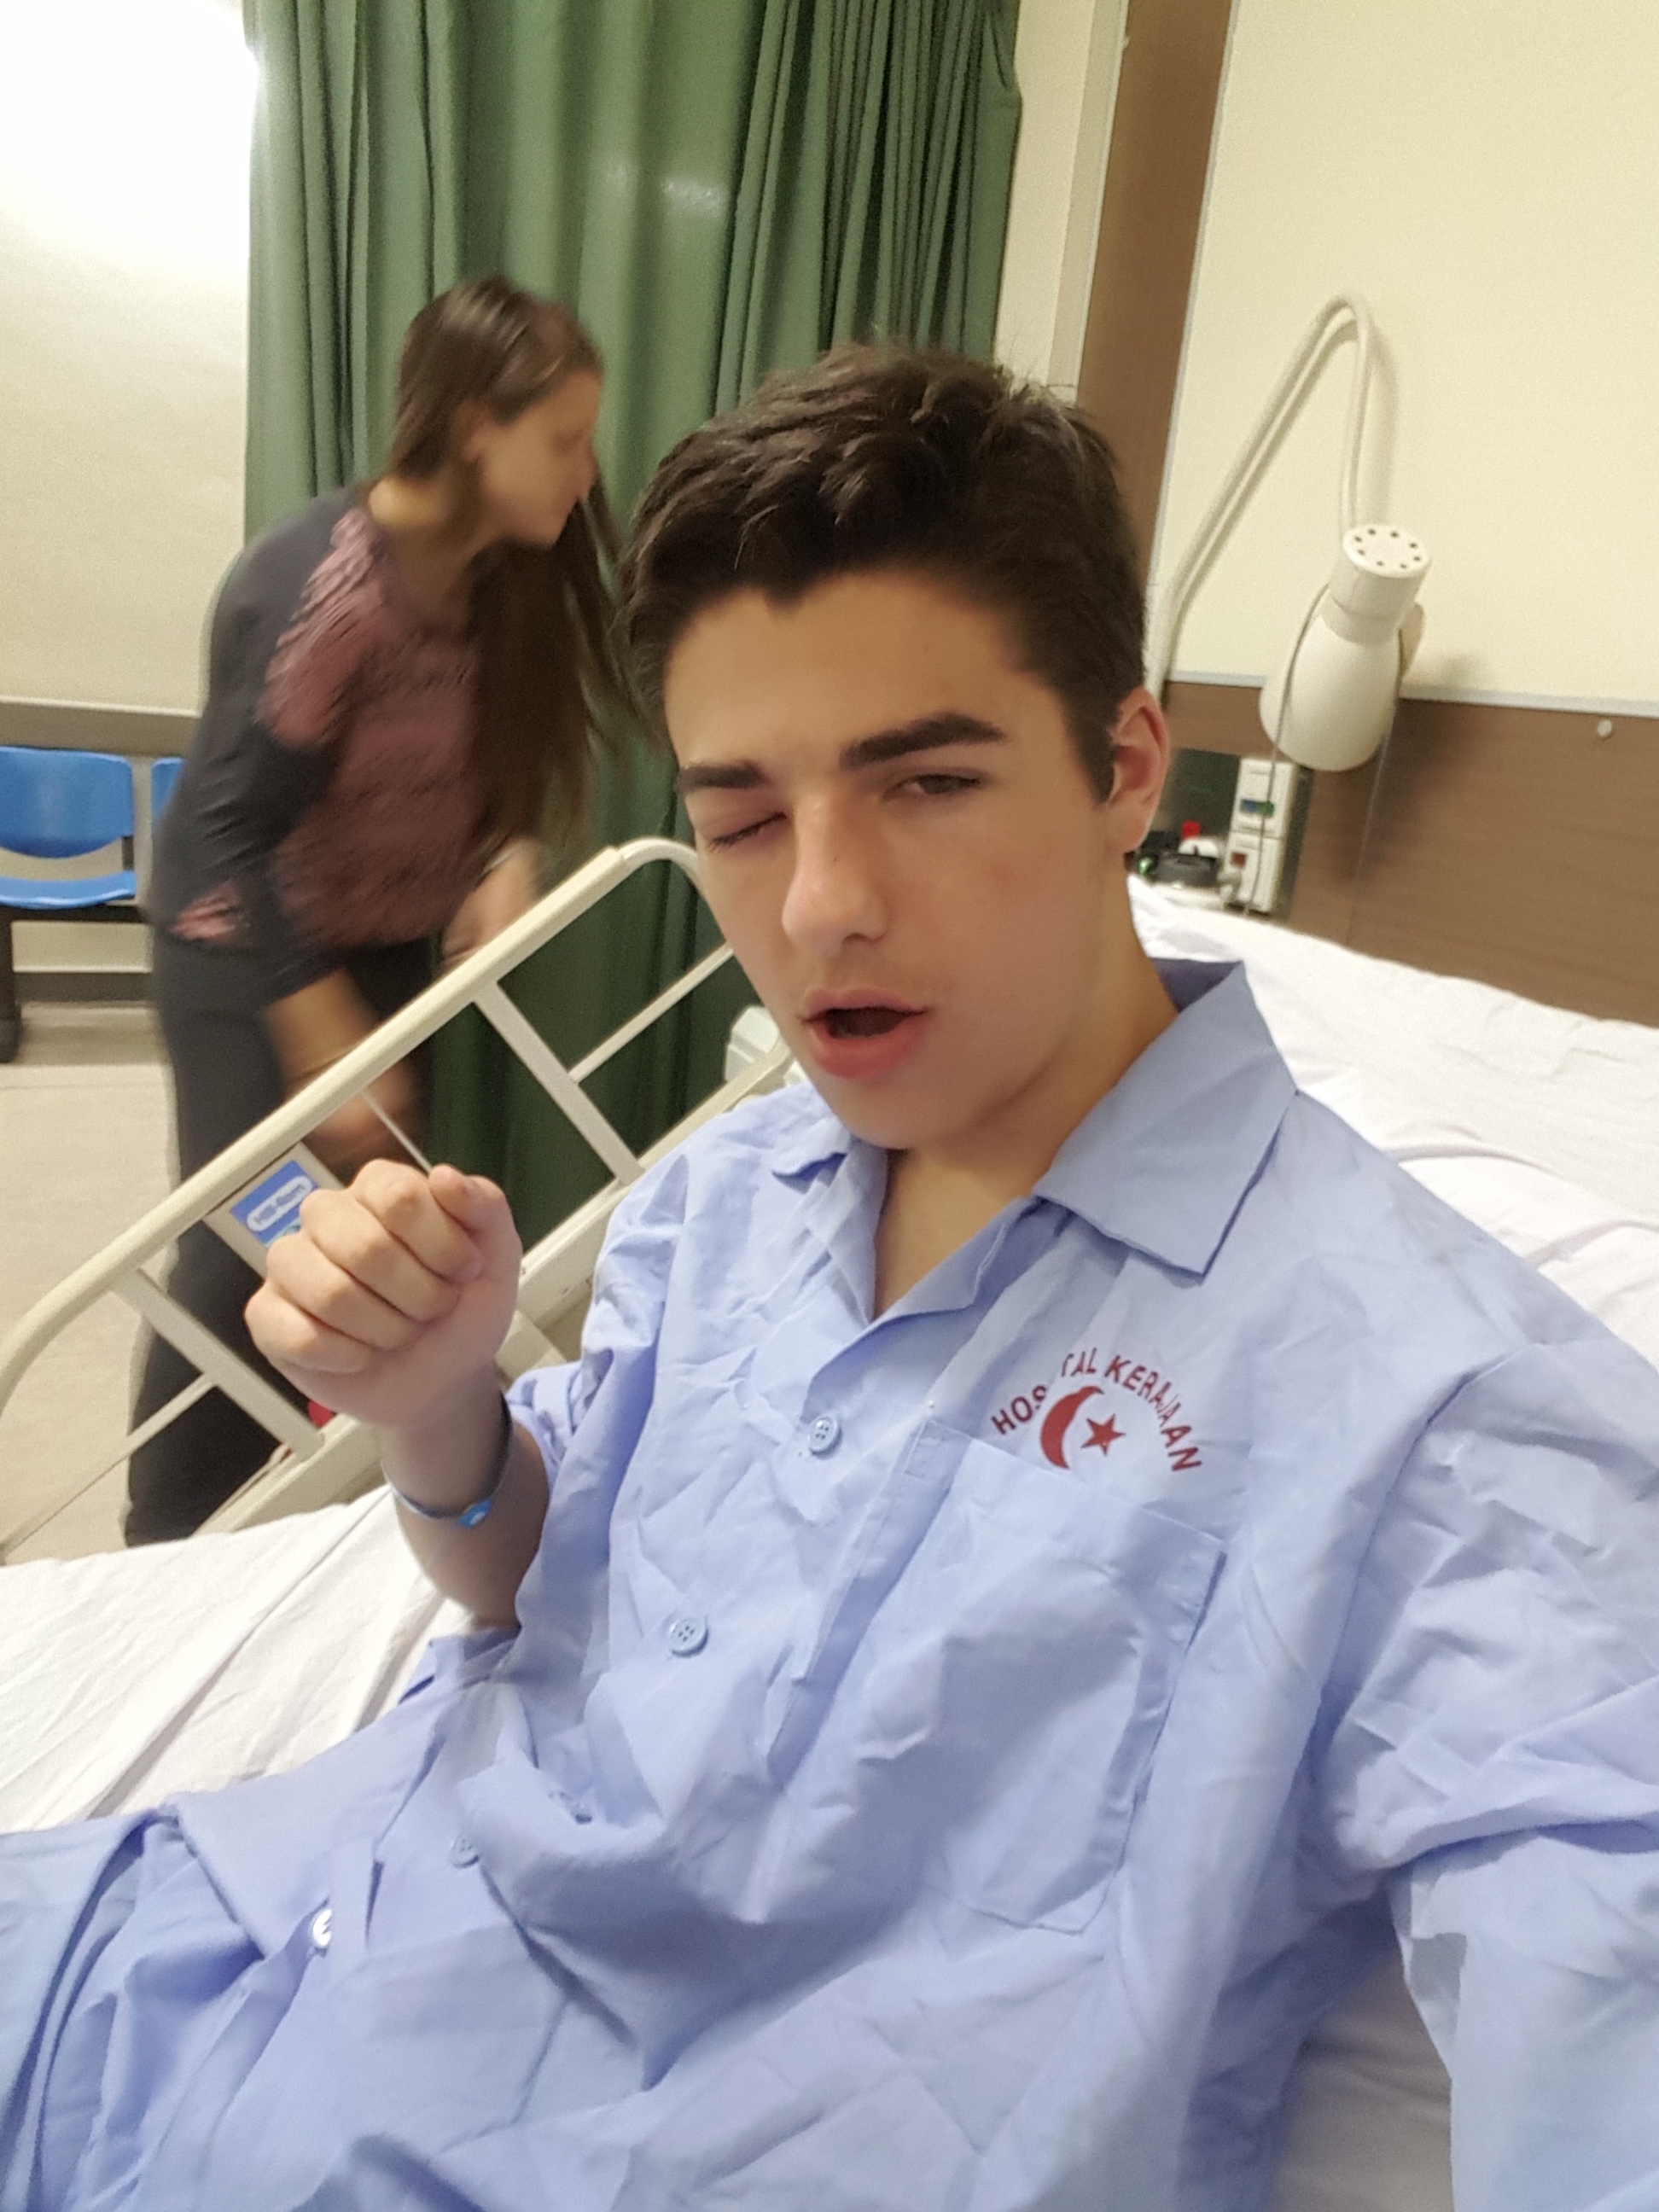 Ryan in the hospital in ThailandHilton taking a selfie after being admitted to the main hospital in Bandar Seri Begawan.